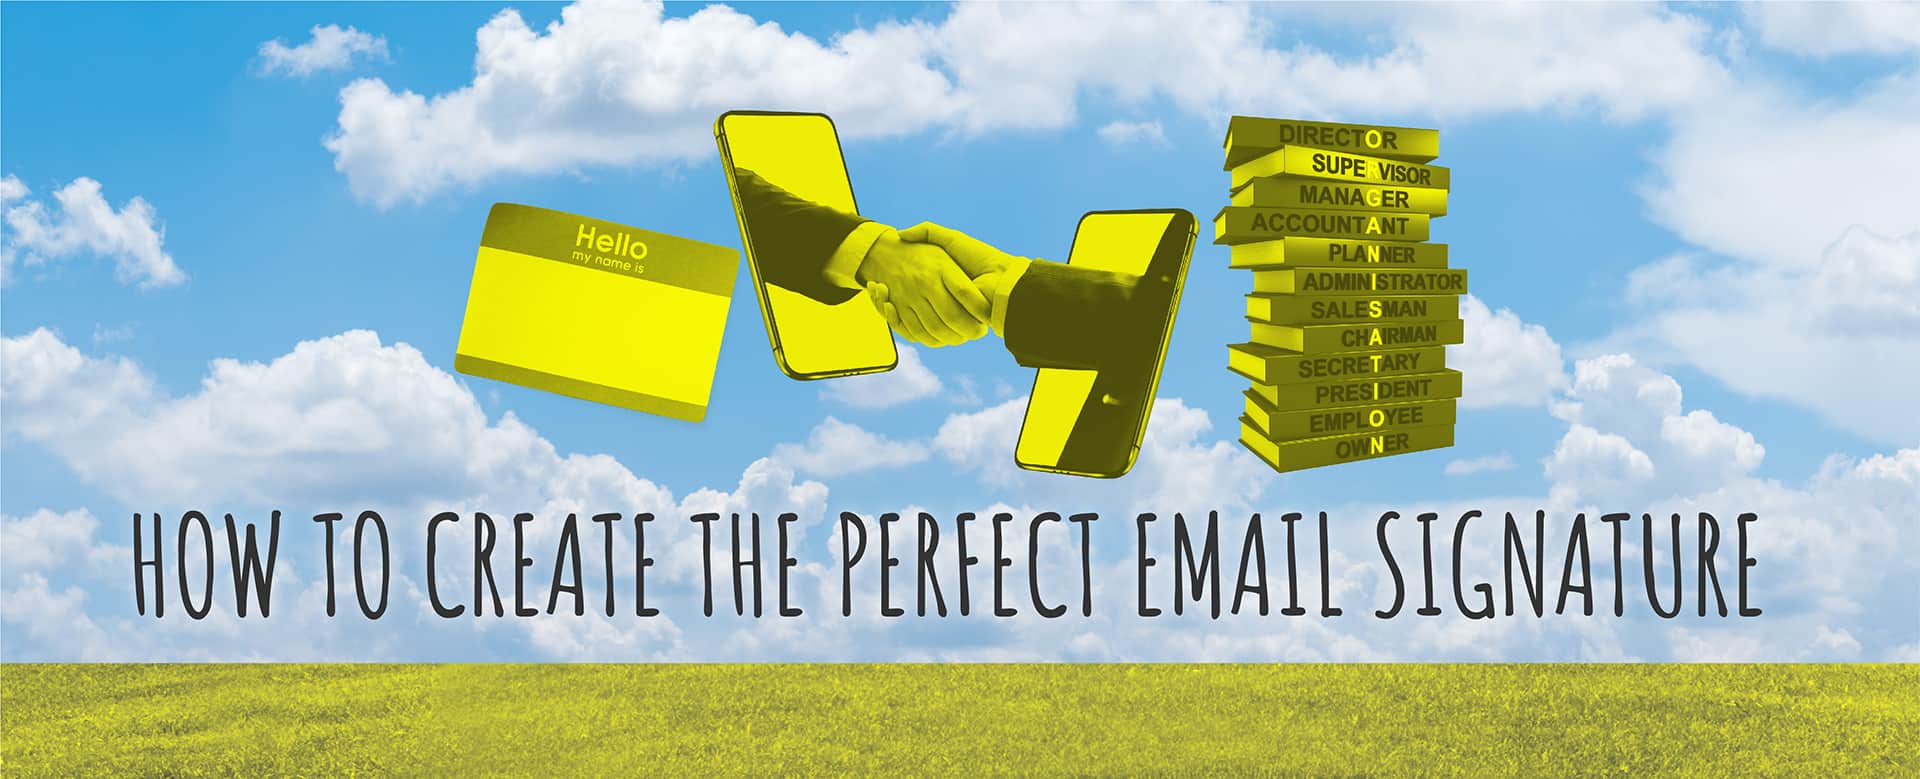 How to Create the Perfect Email Signature